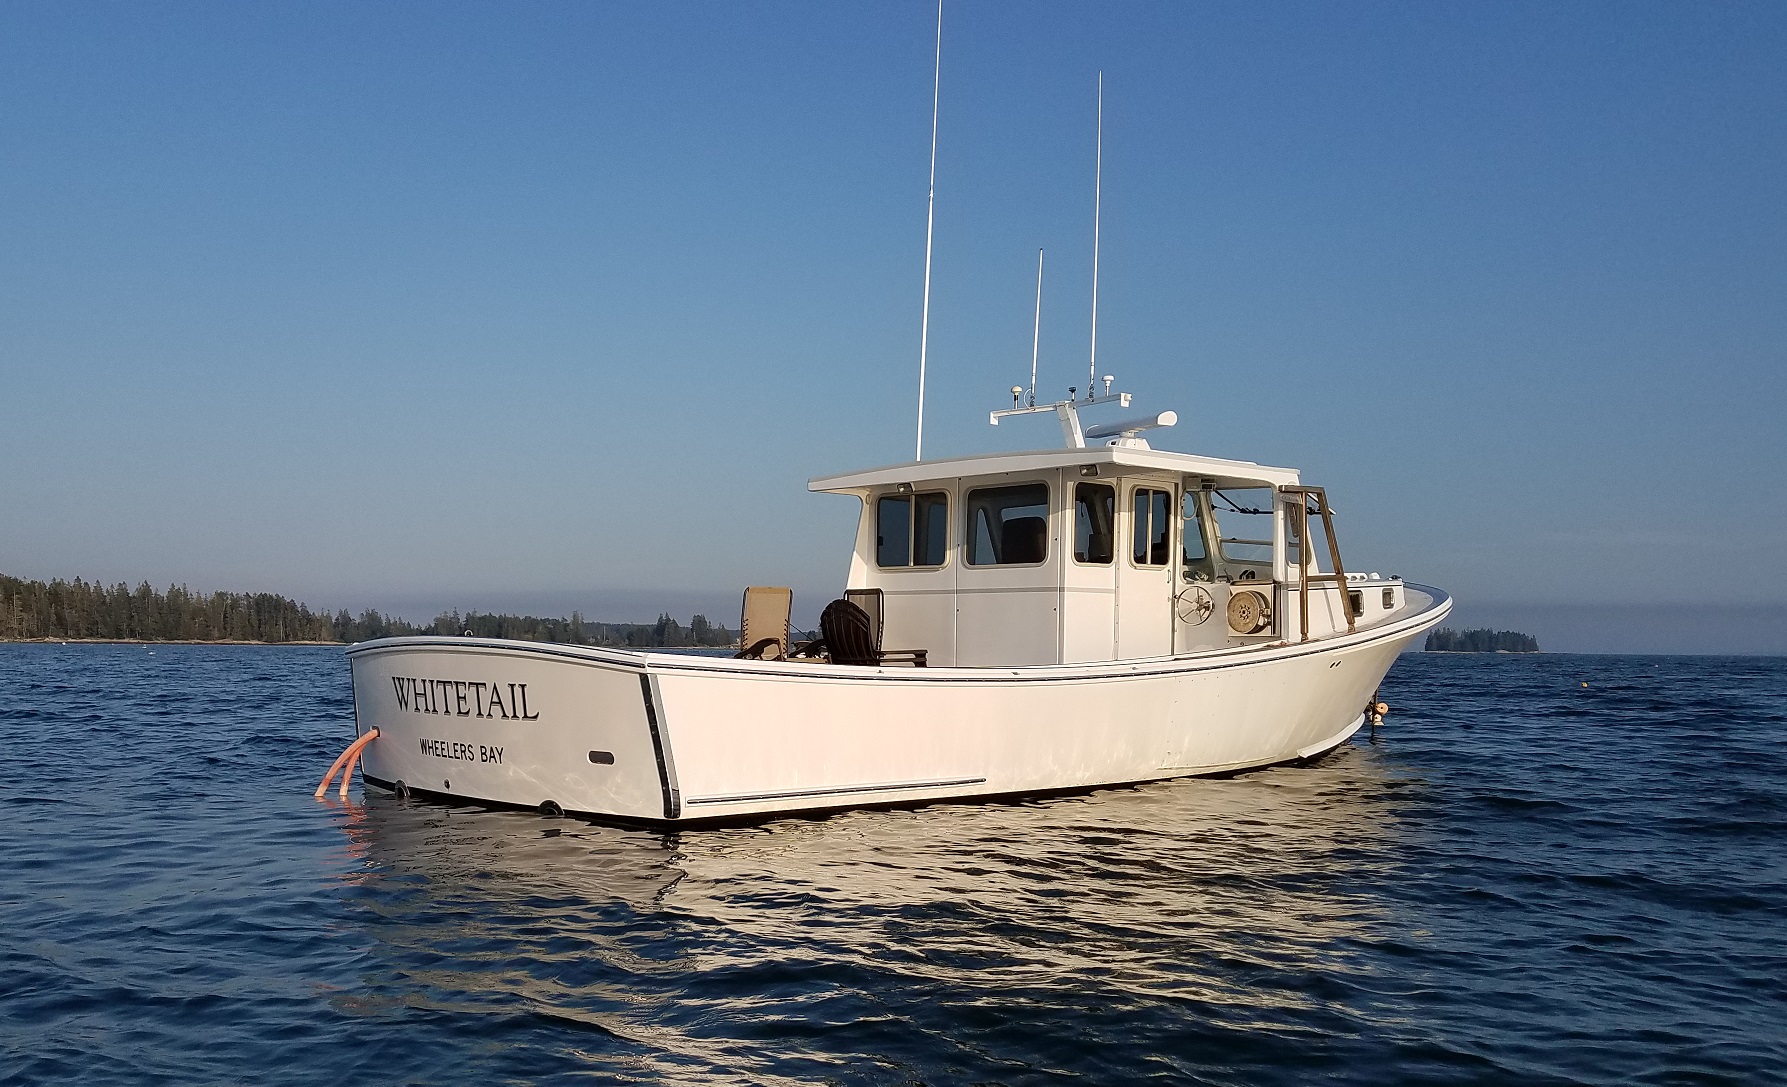 Lobster Boats For Sale - Buy Sell Lobster Boats - Lobster Boat Sales